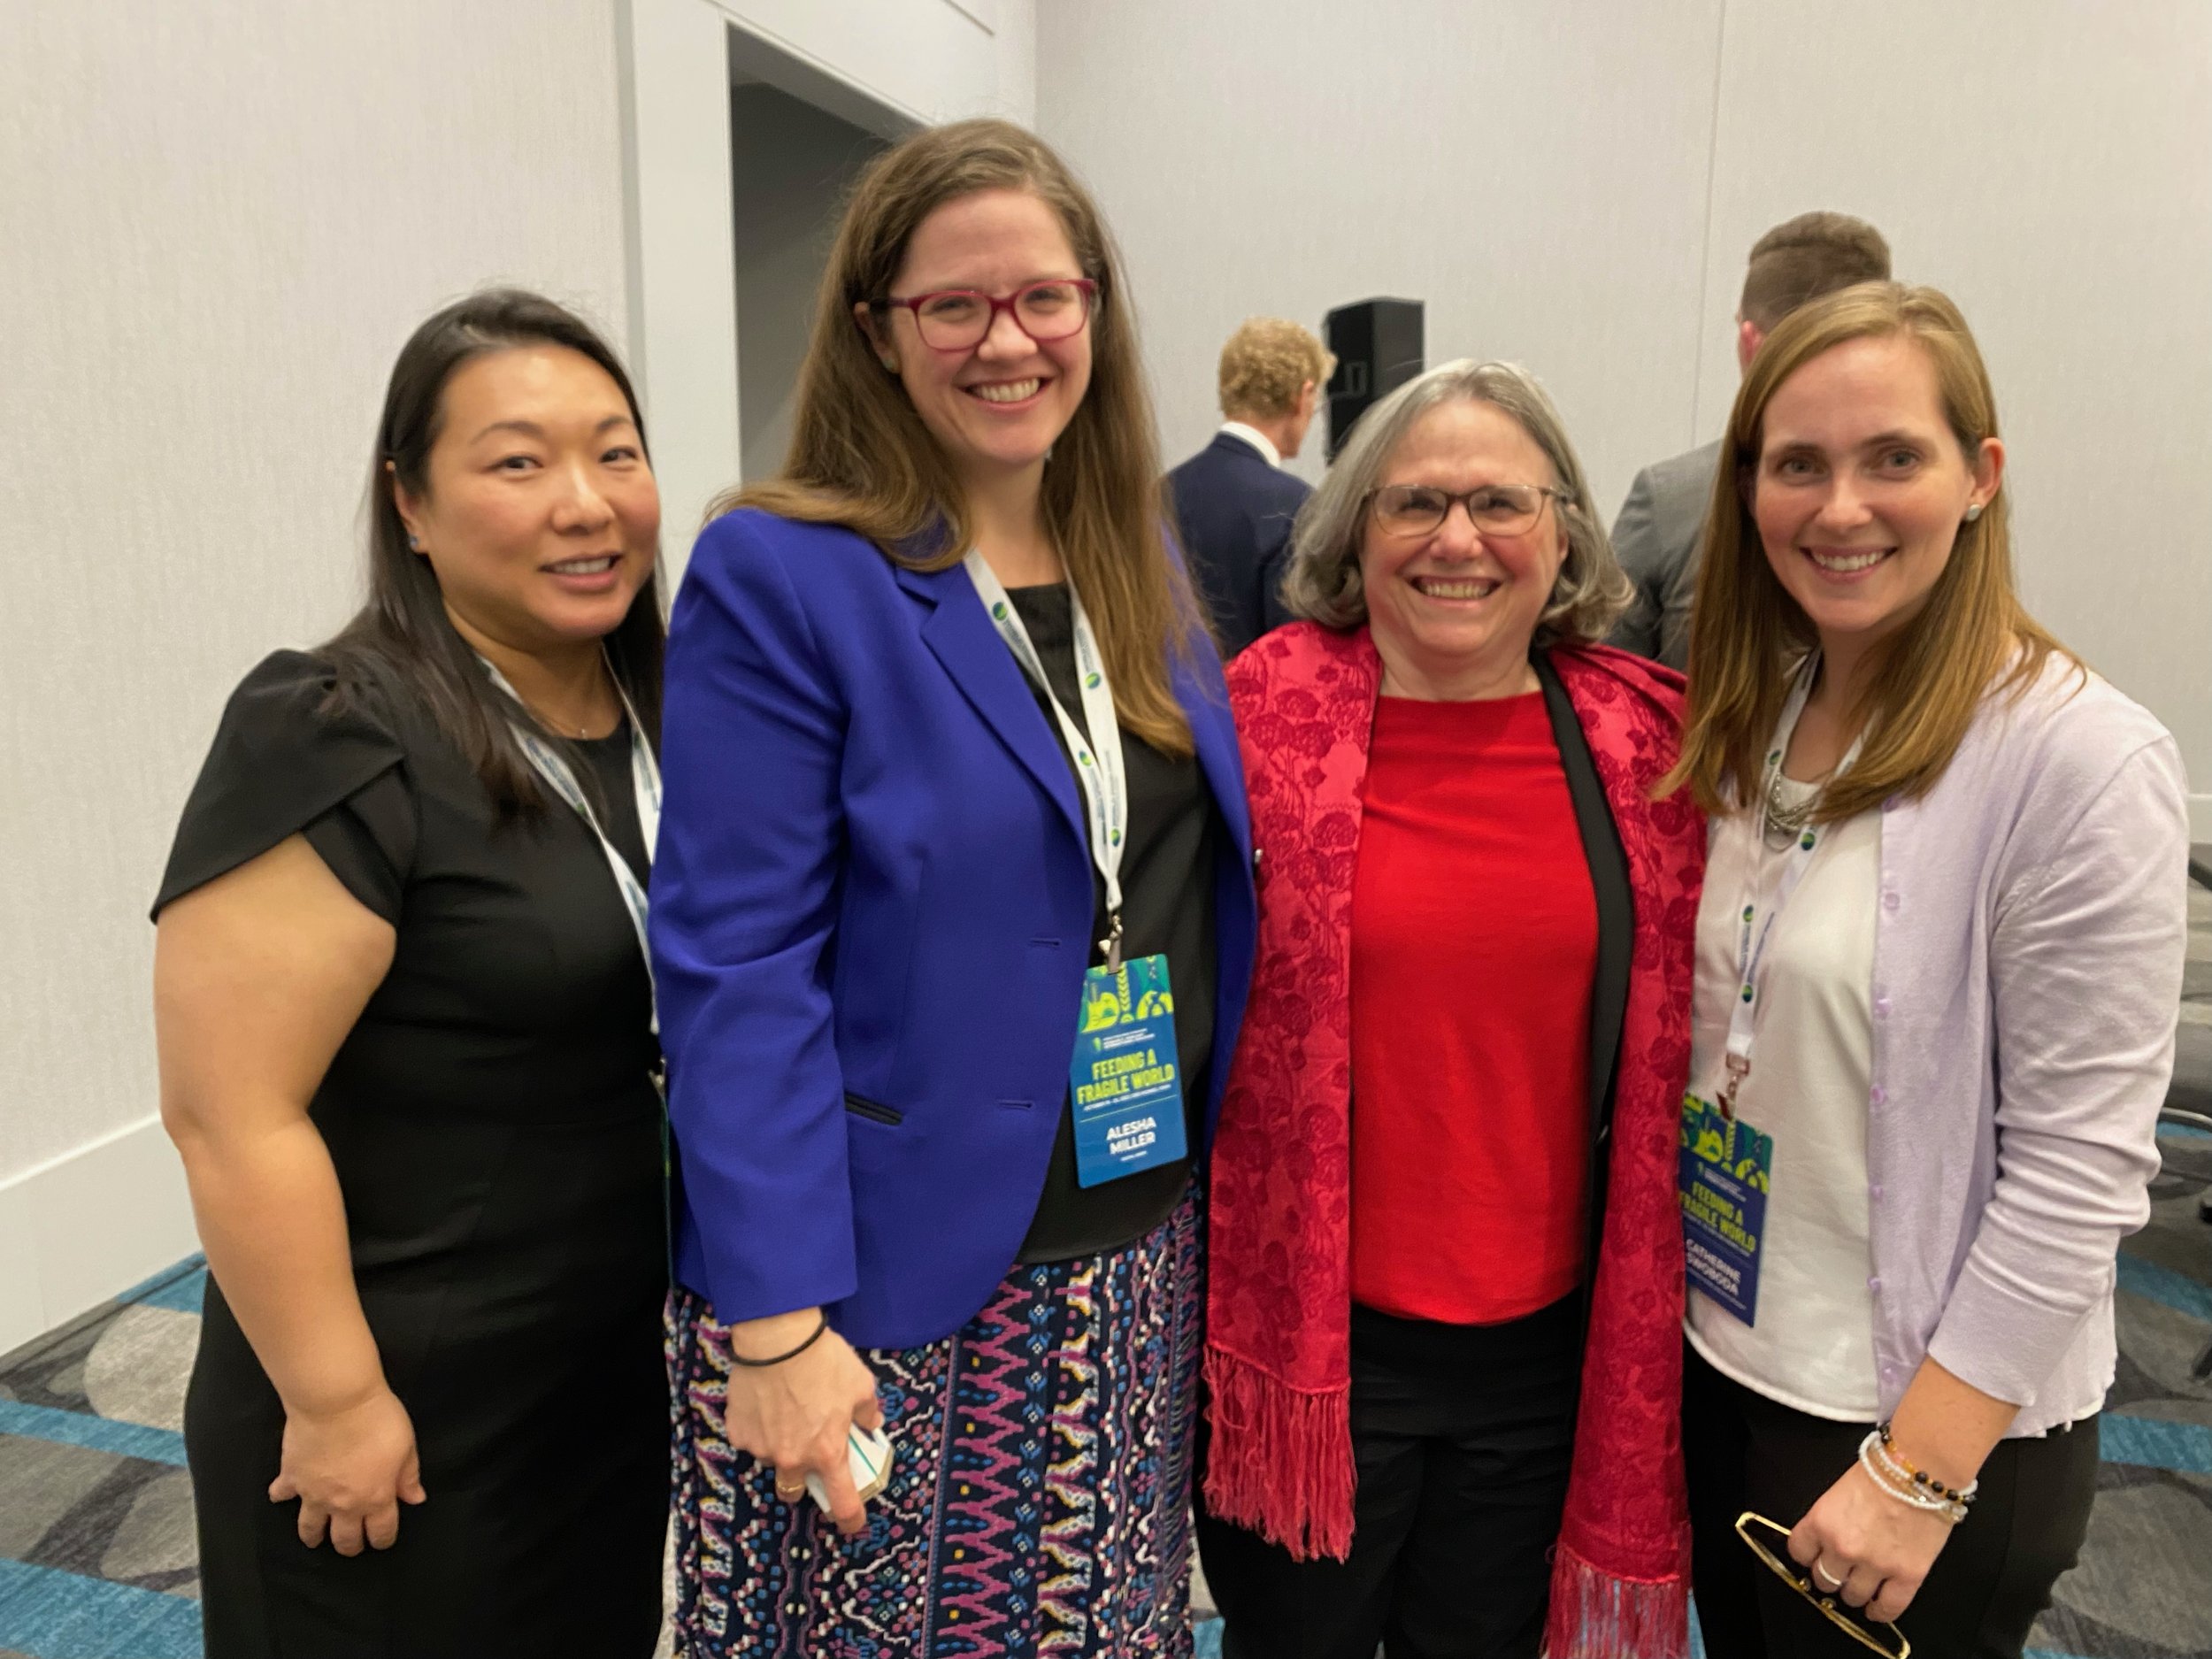  With inspirational leaders in agricultural development in Des Moines (2022) - Peggy Yih, Alesha Black, Catherine Swoboda 